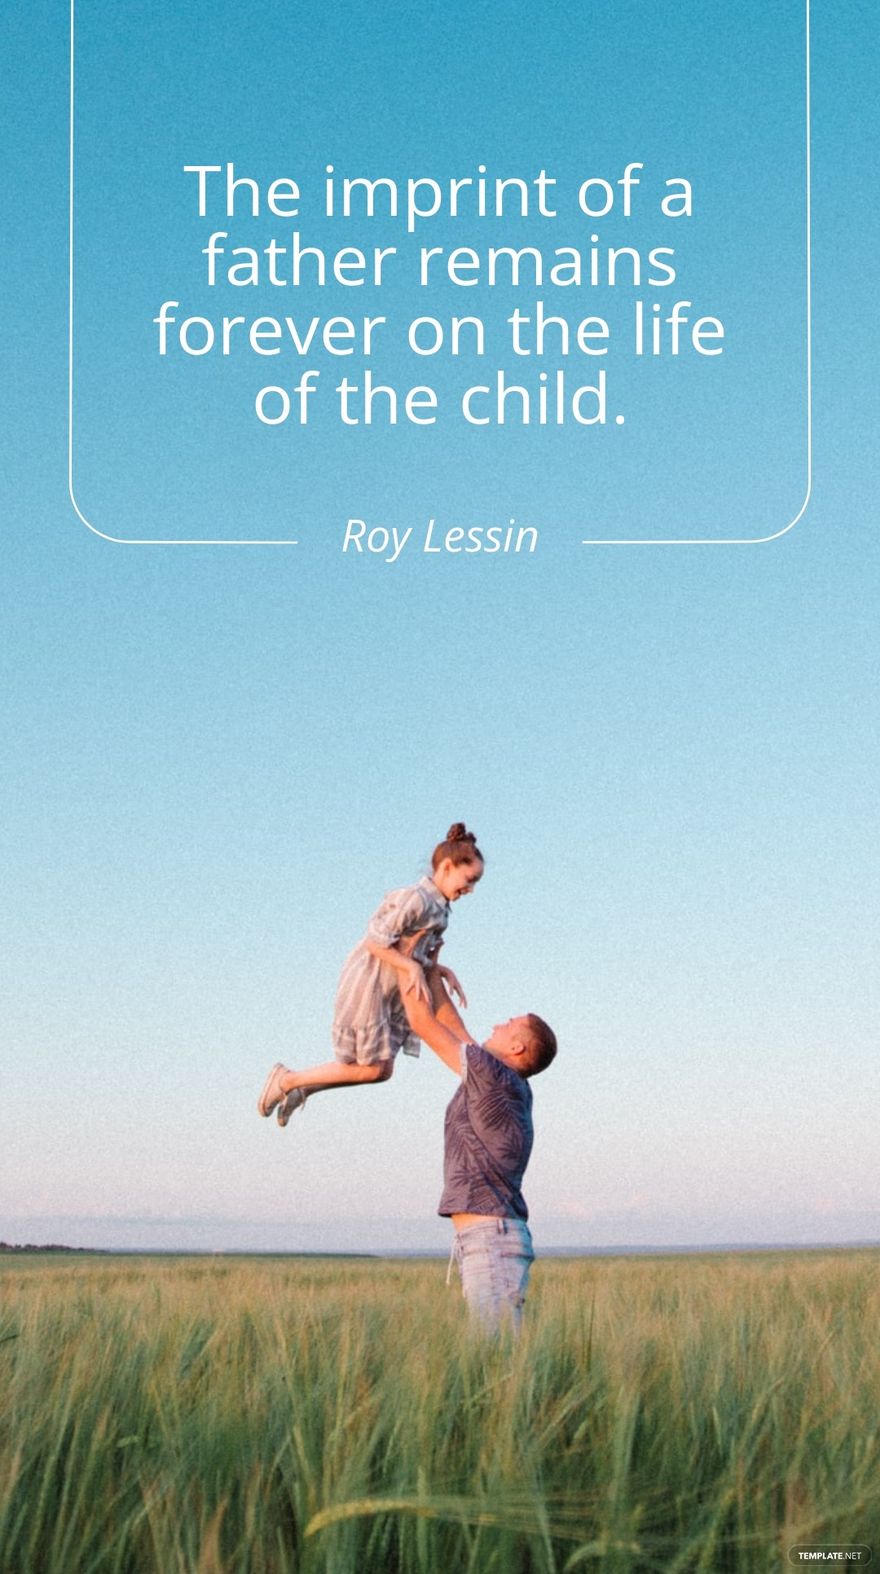 Roy Lessin - The imprint of a father remains forever on the life of the child.